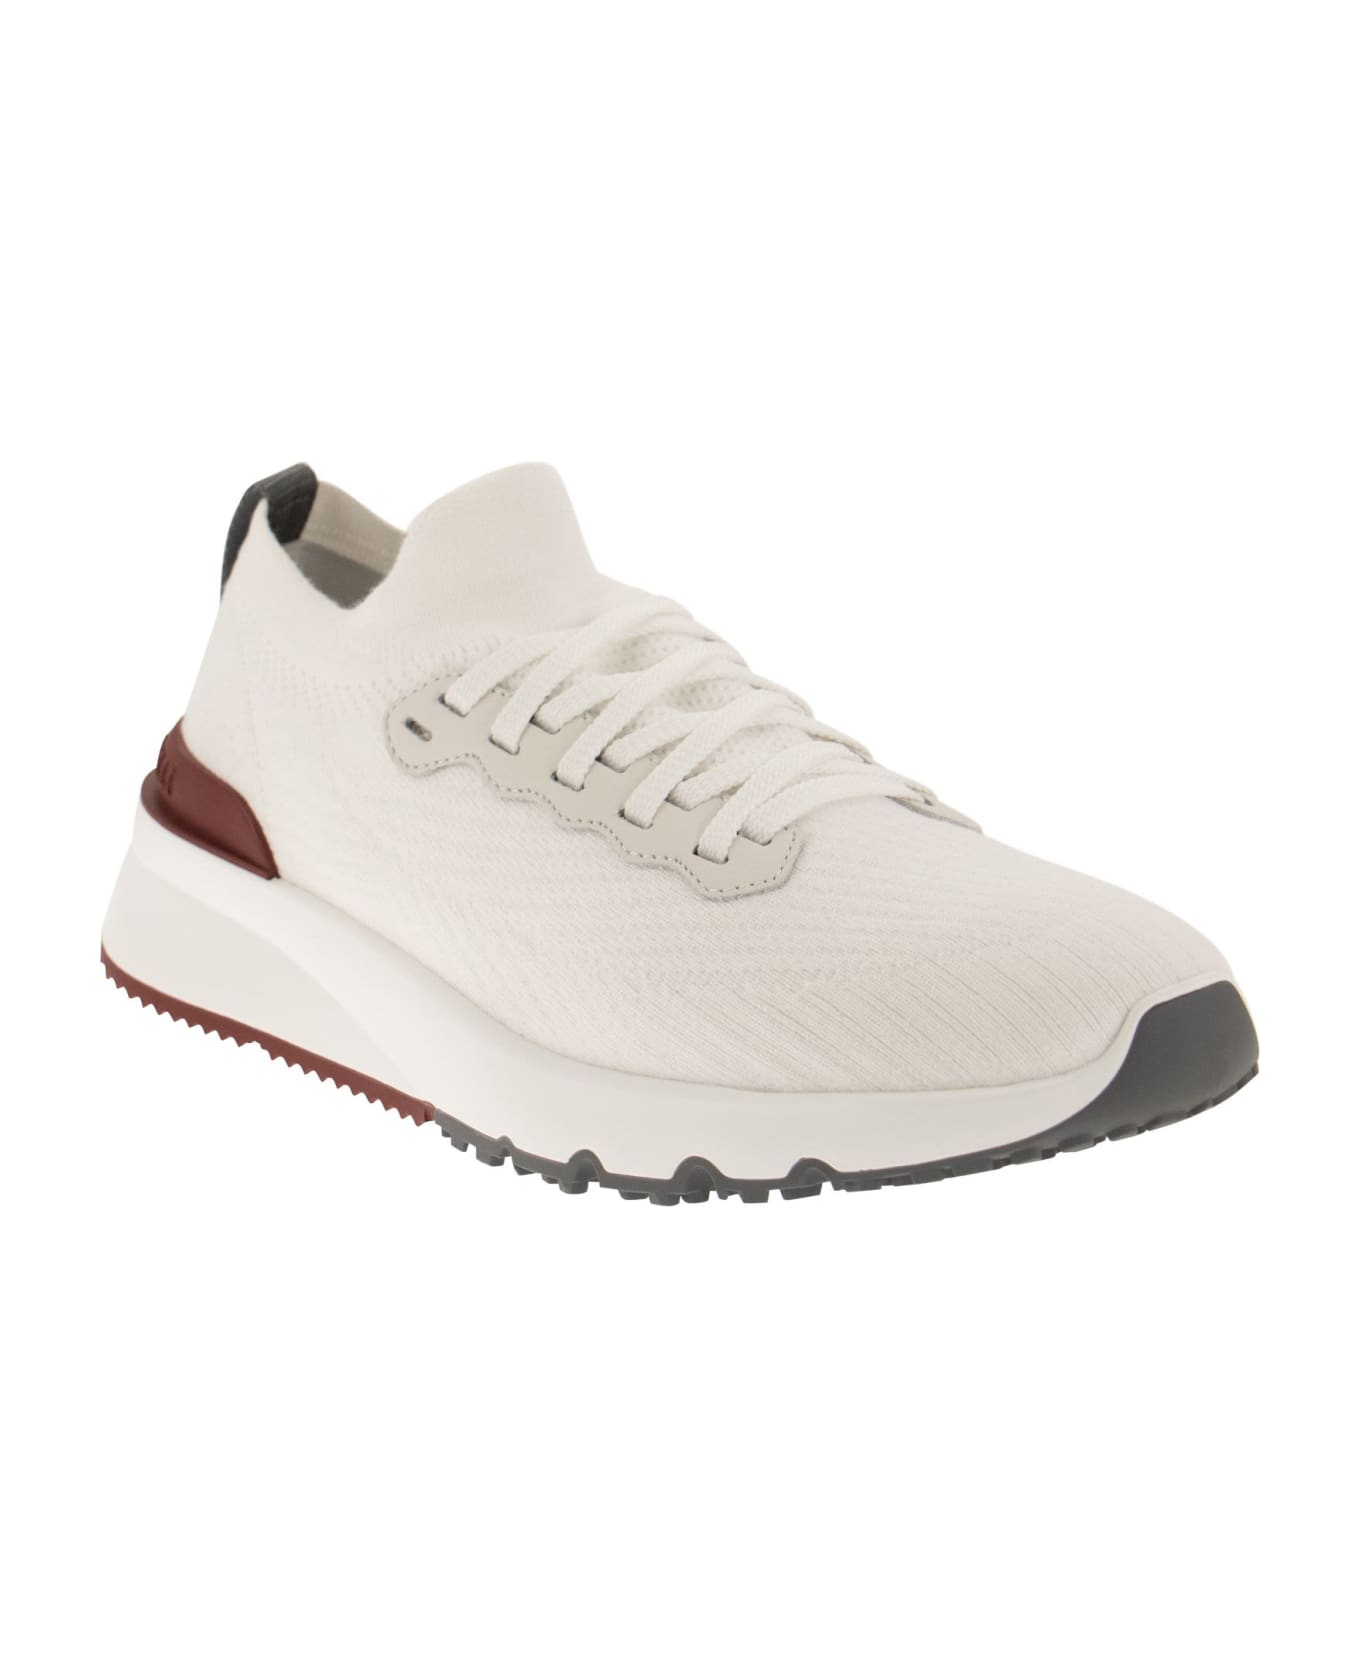 Brunello Cucinelli Runners In Cotton Knit And Semi-glossy Calf Leather - White